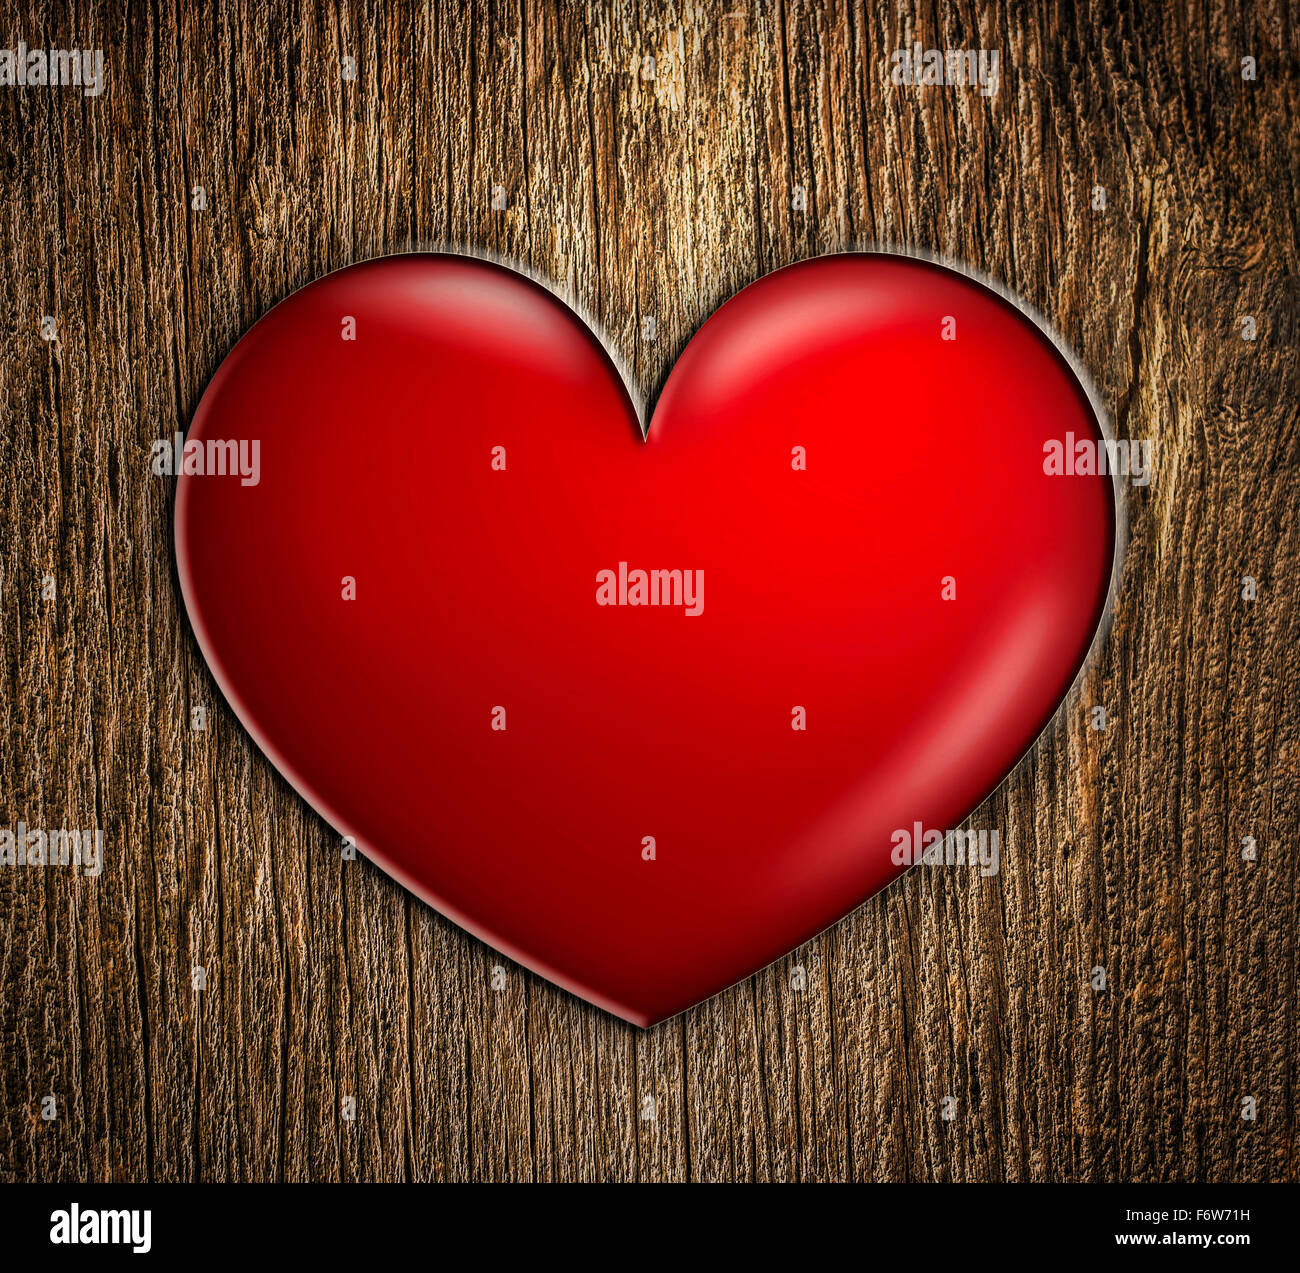 red heart on wood Stock Photo